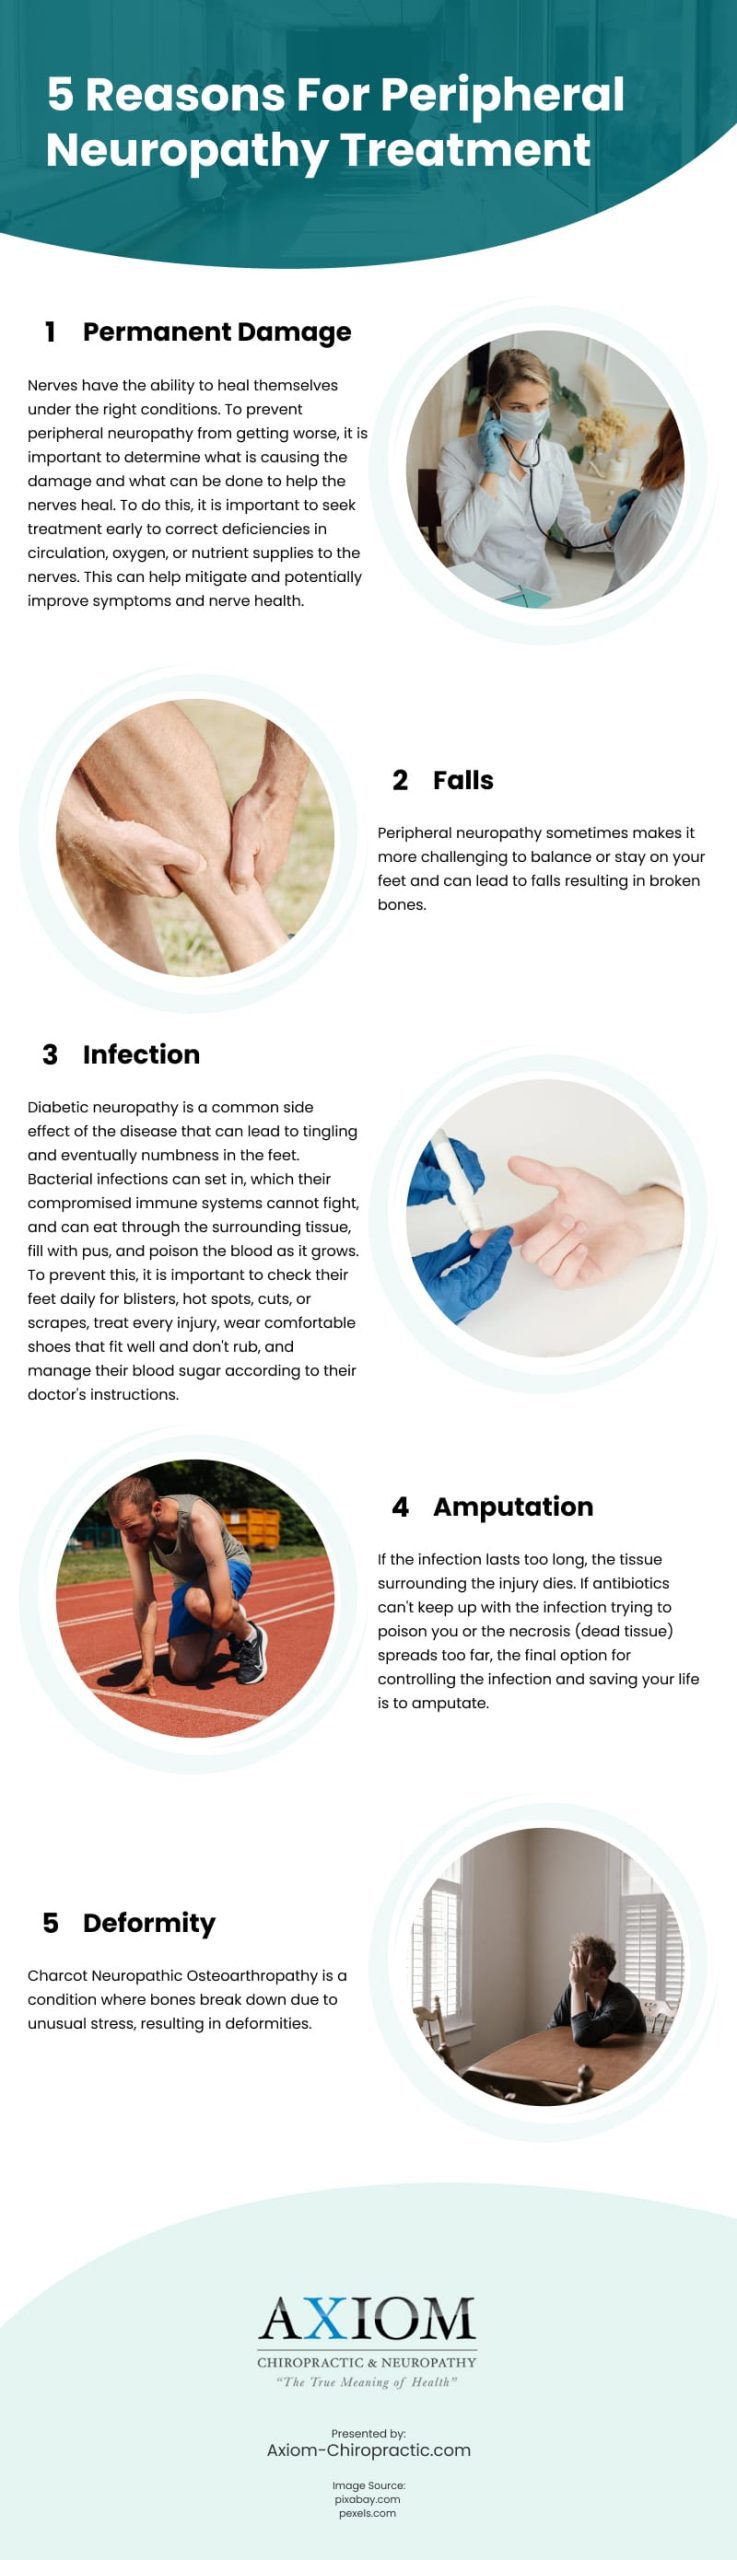 5 Reasons For Peripheral Neuropathy Treatment Infographic